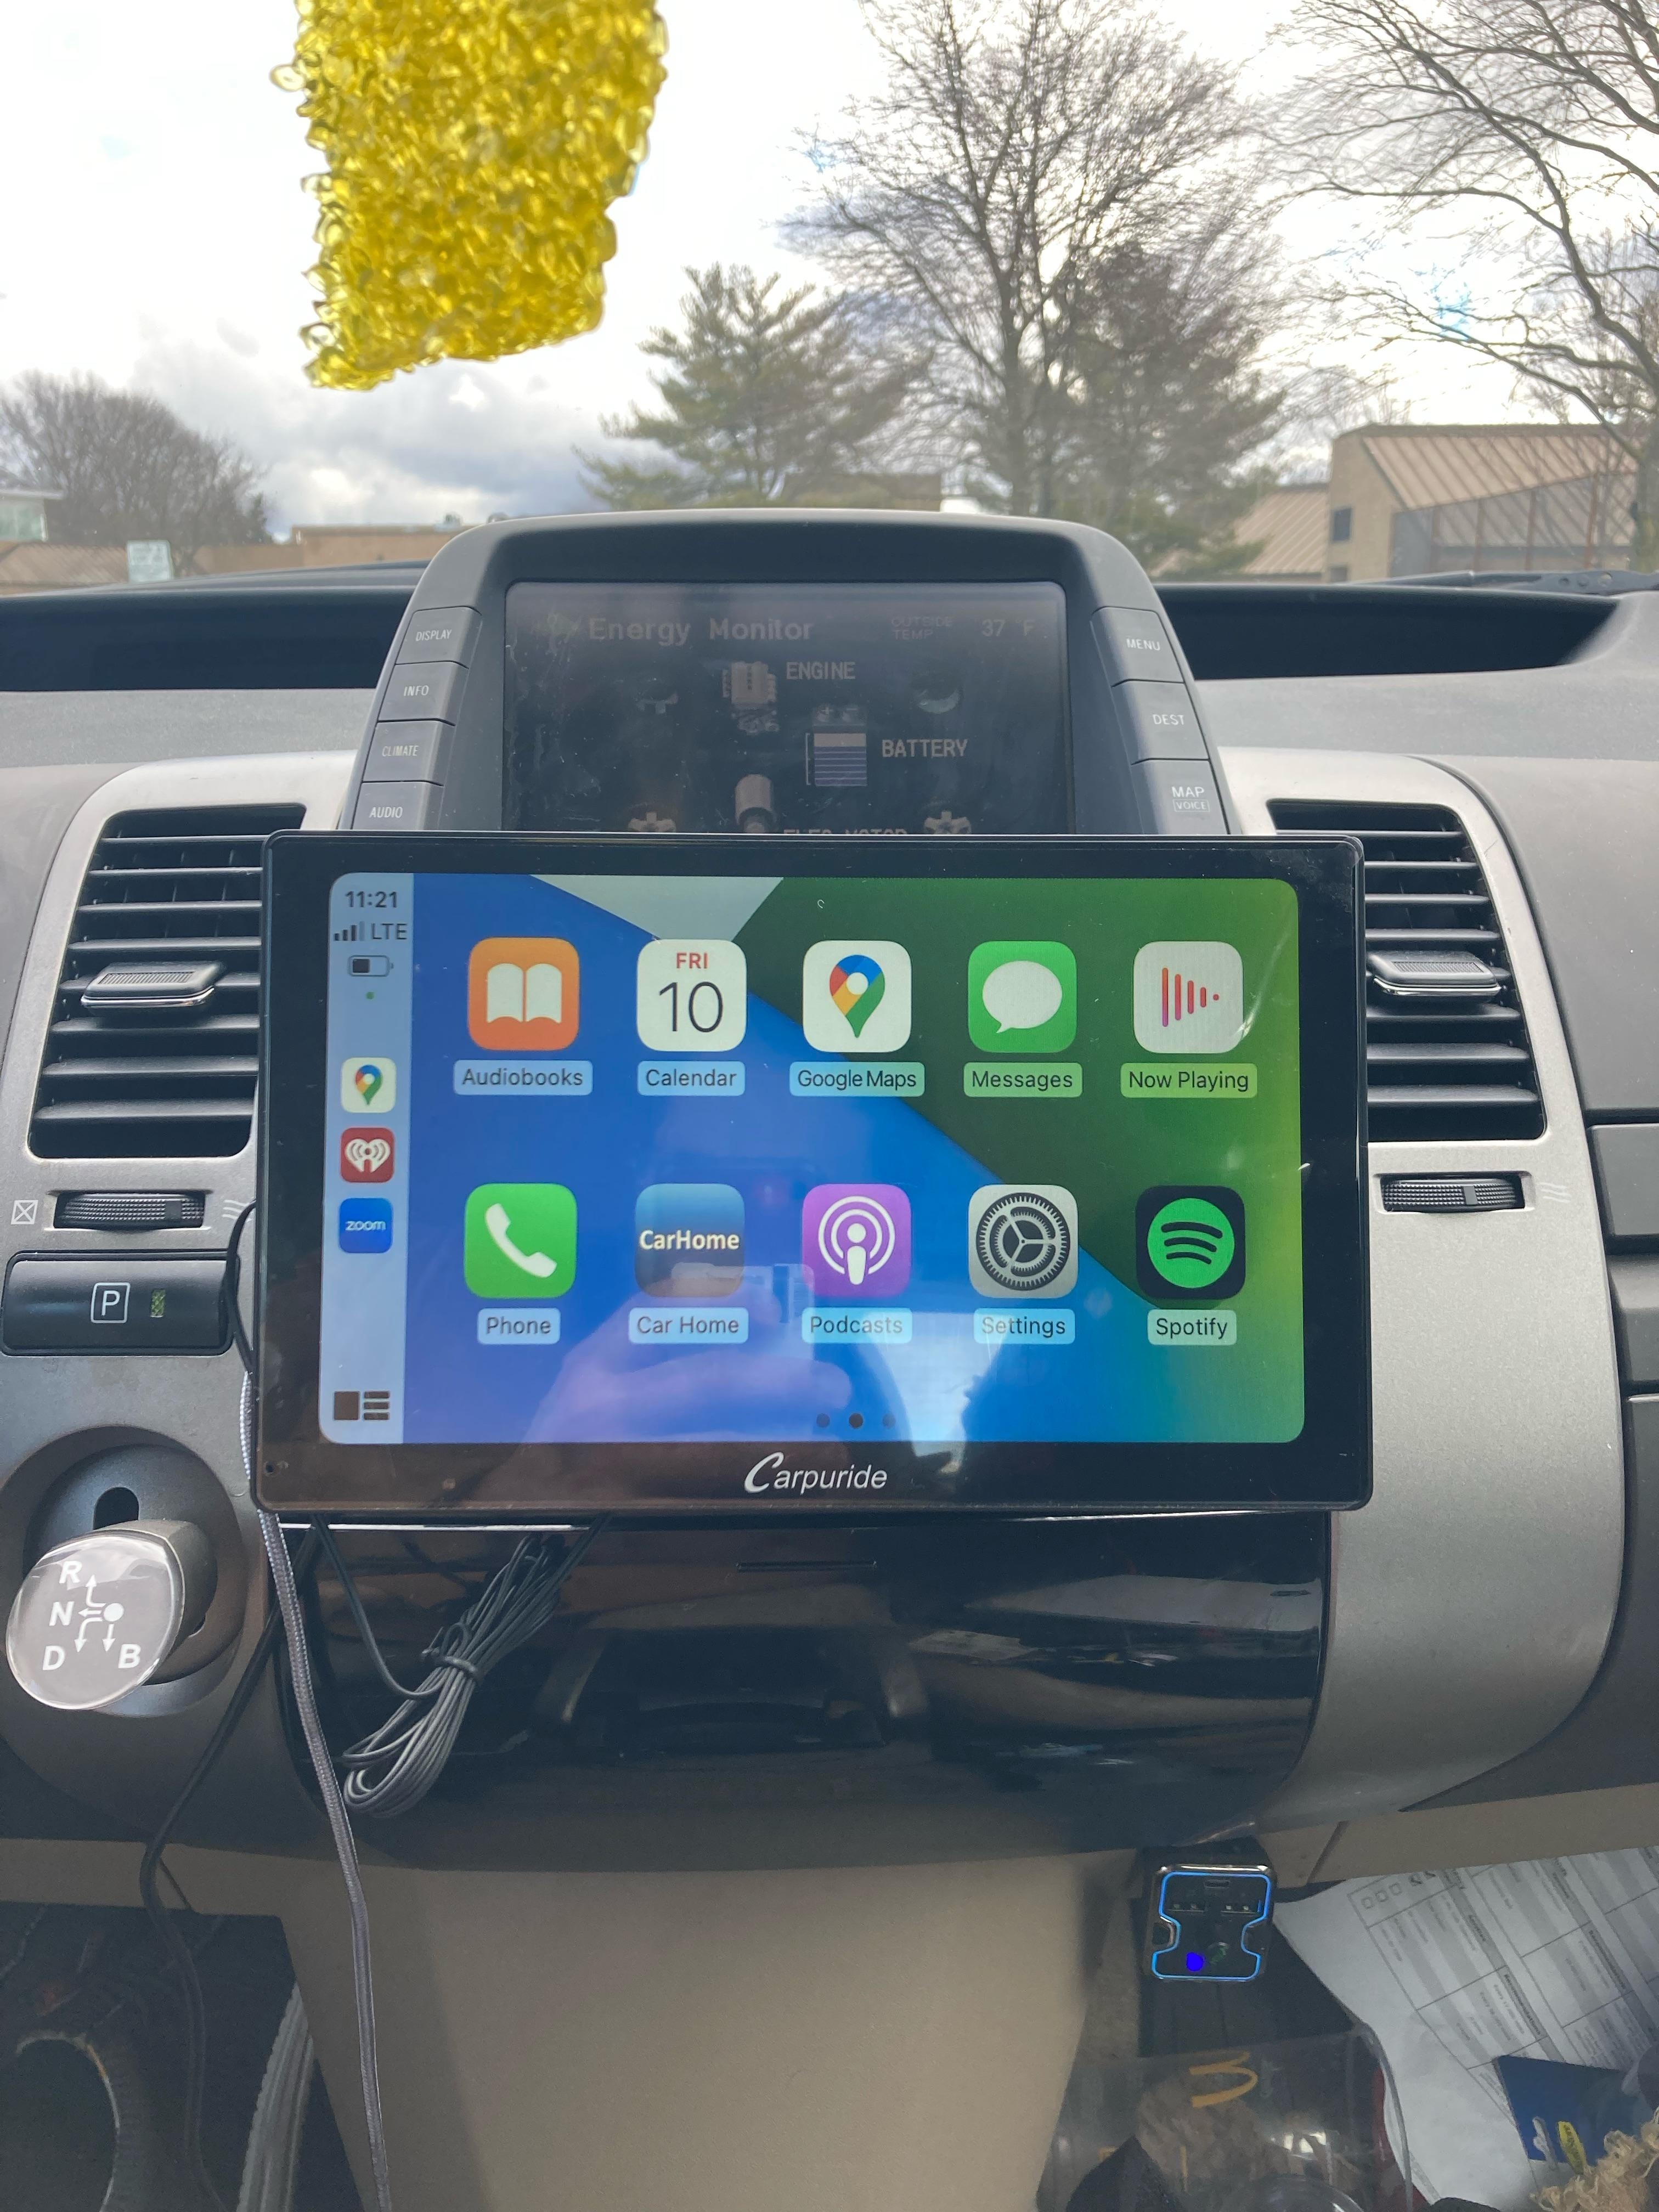 Tablet mounted on car dashboard displaying various app icons for navigation and media